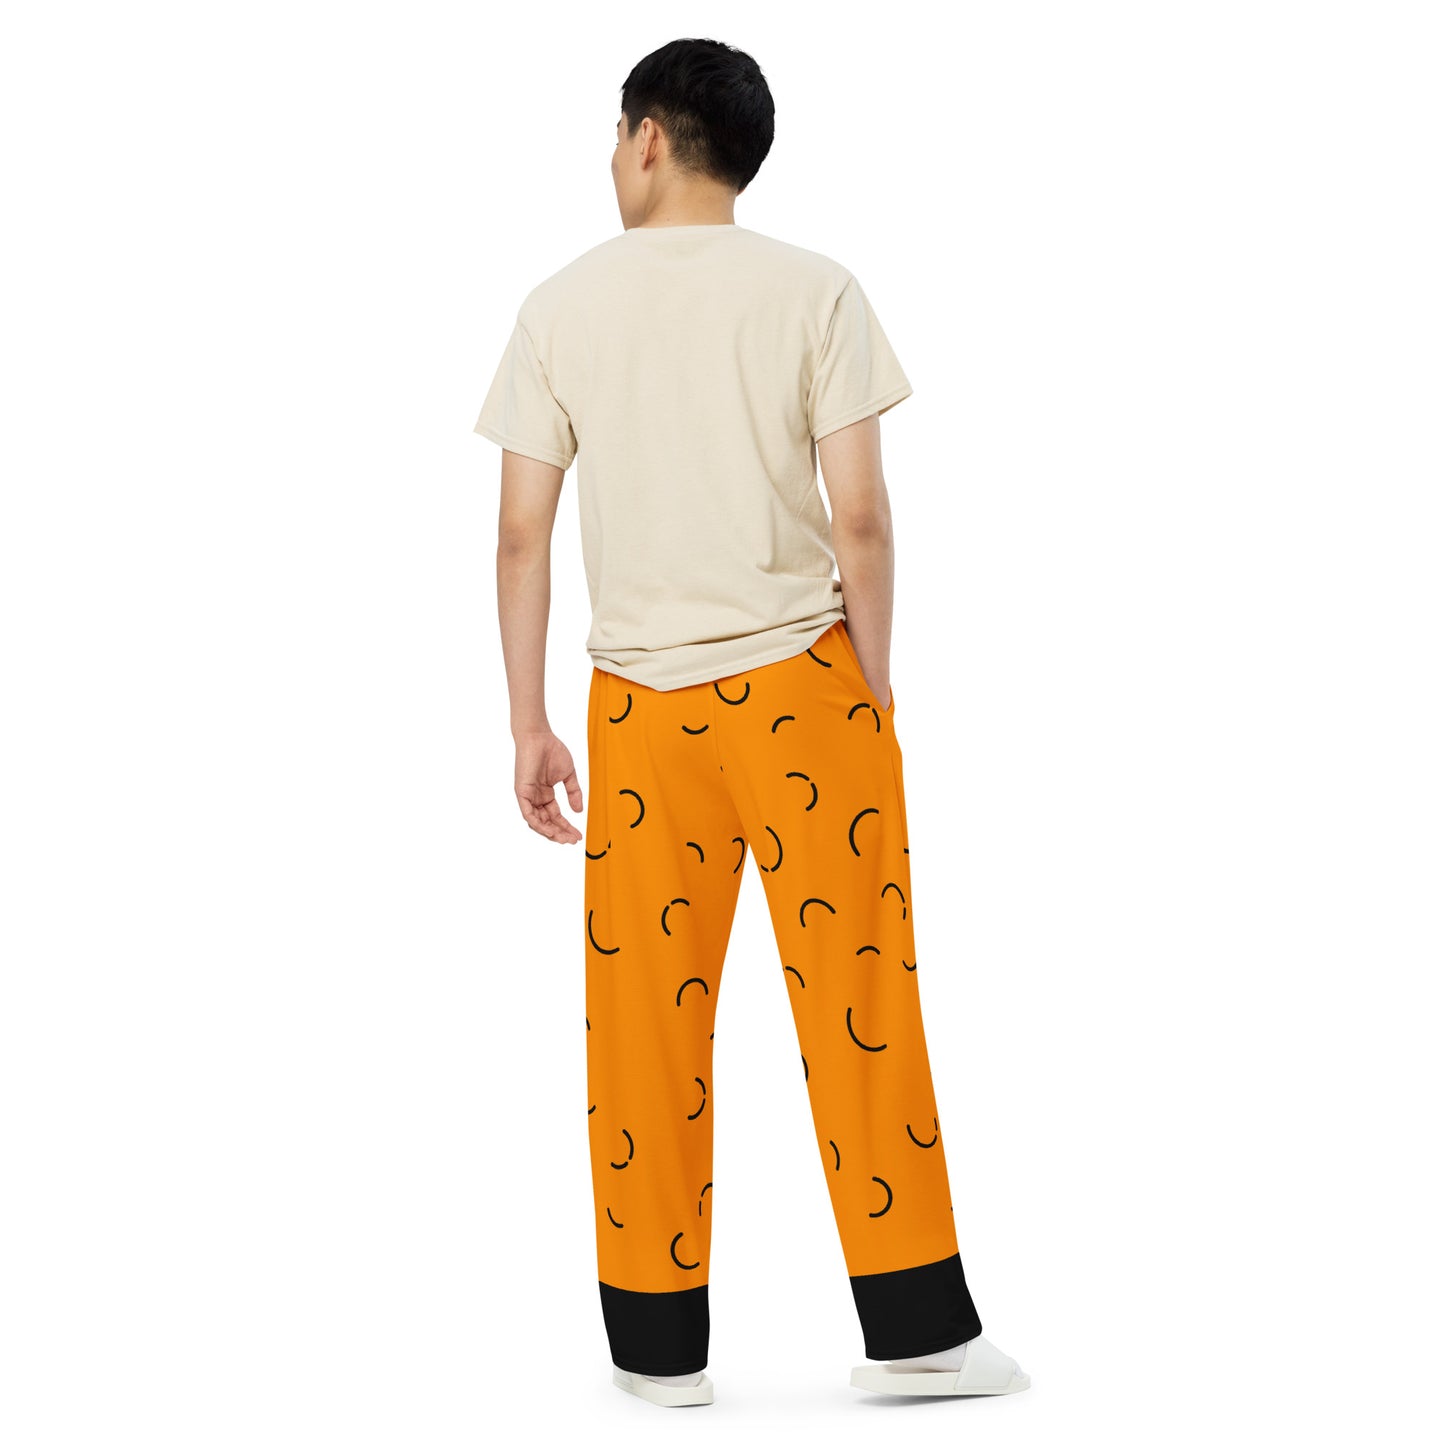 Squats and Tots All-over print unisex wide-leg pants